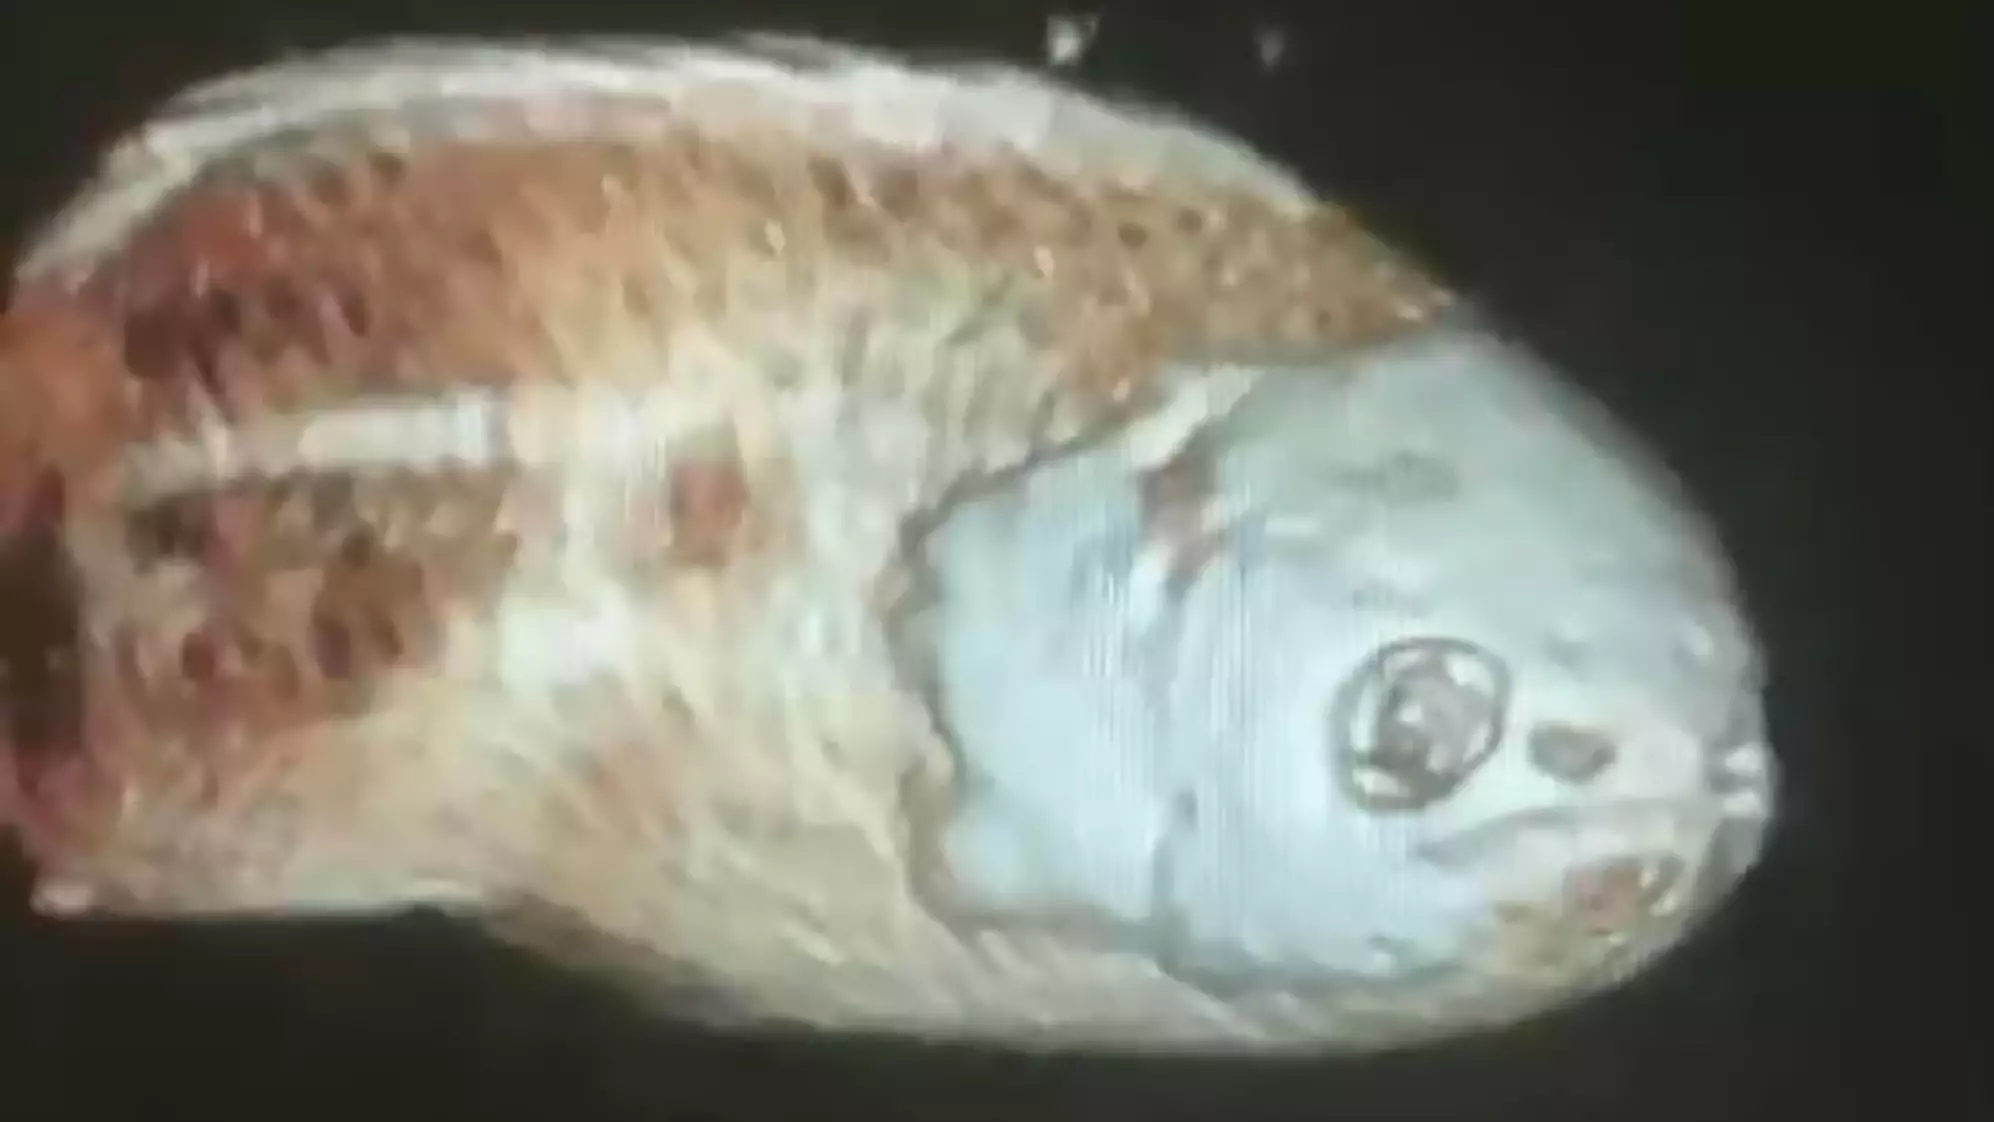 Man Has Whole Fish Stuck In Rectum After 'Sitting On It By Accident'